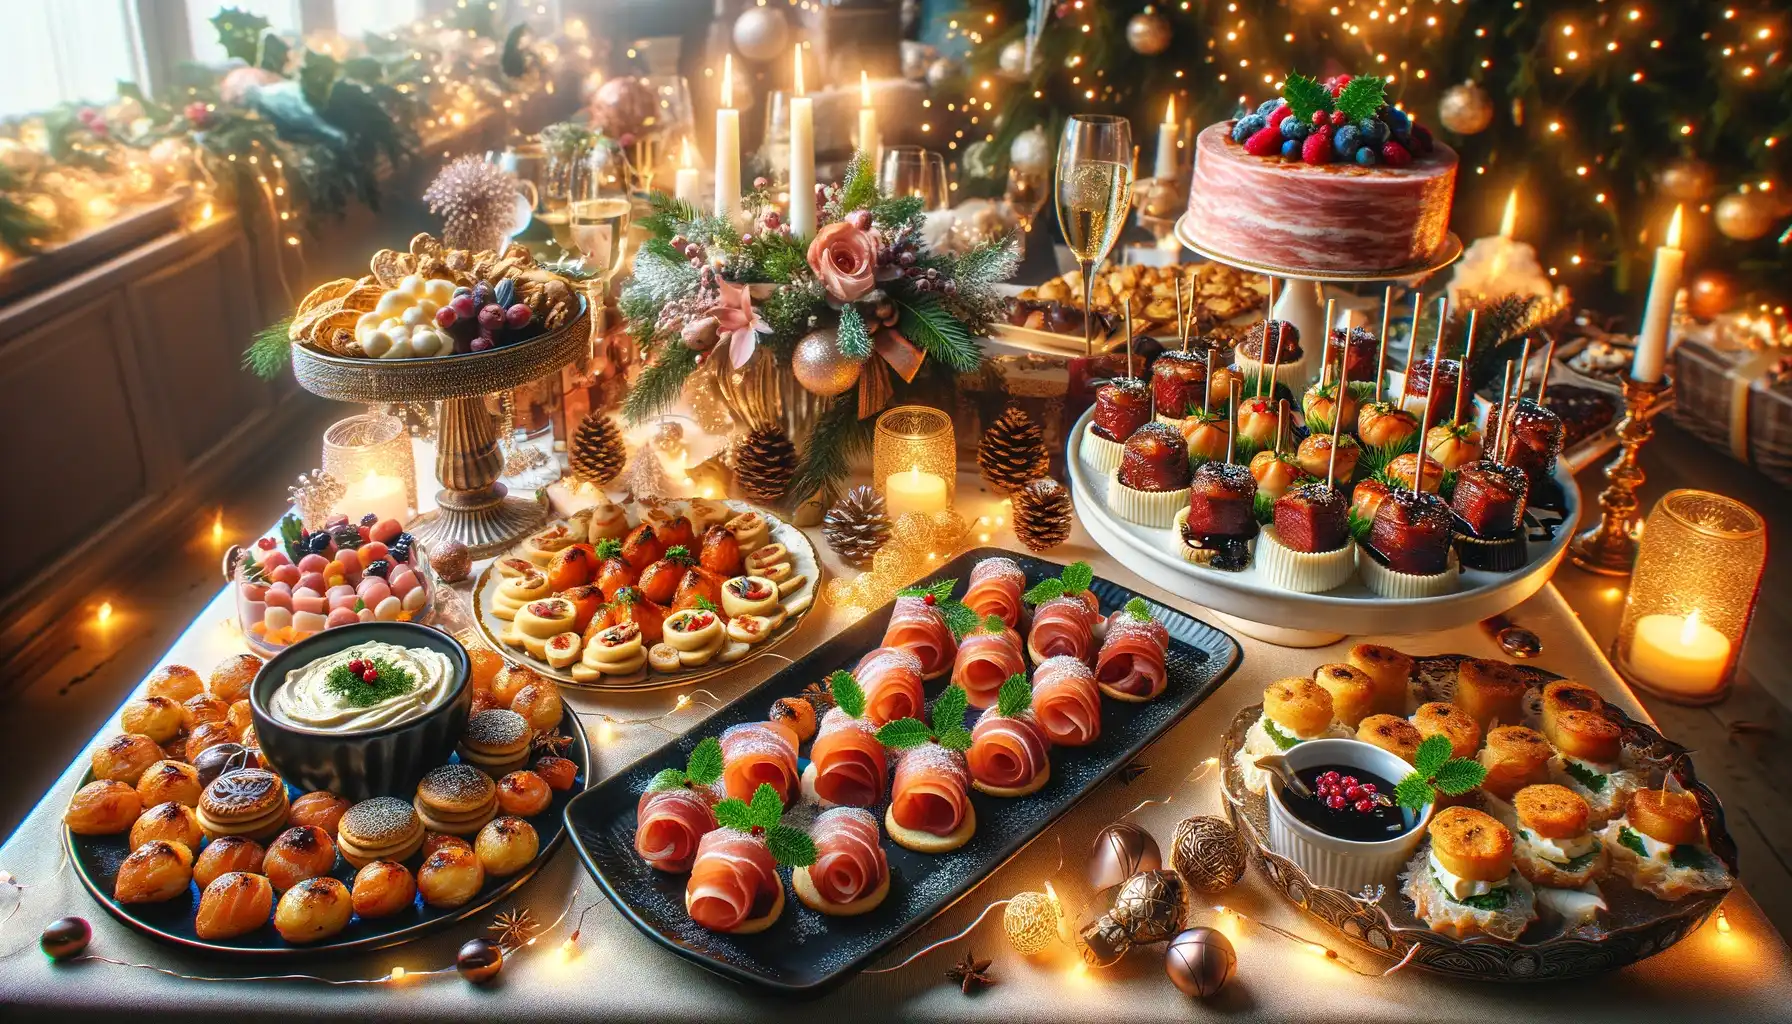 Table with Snacks. Buffet. Beautiful Presentation of Dishes for the